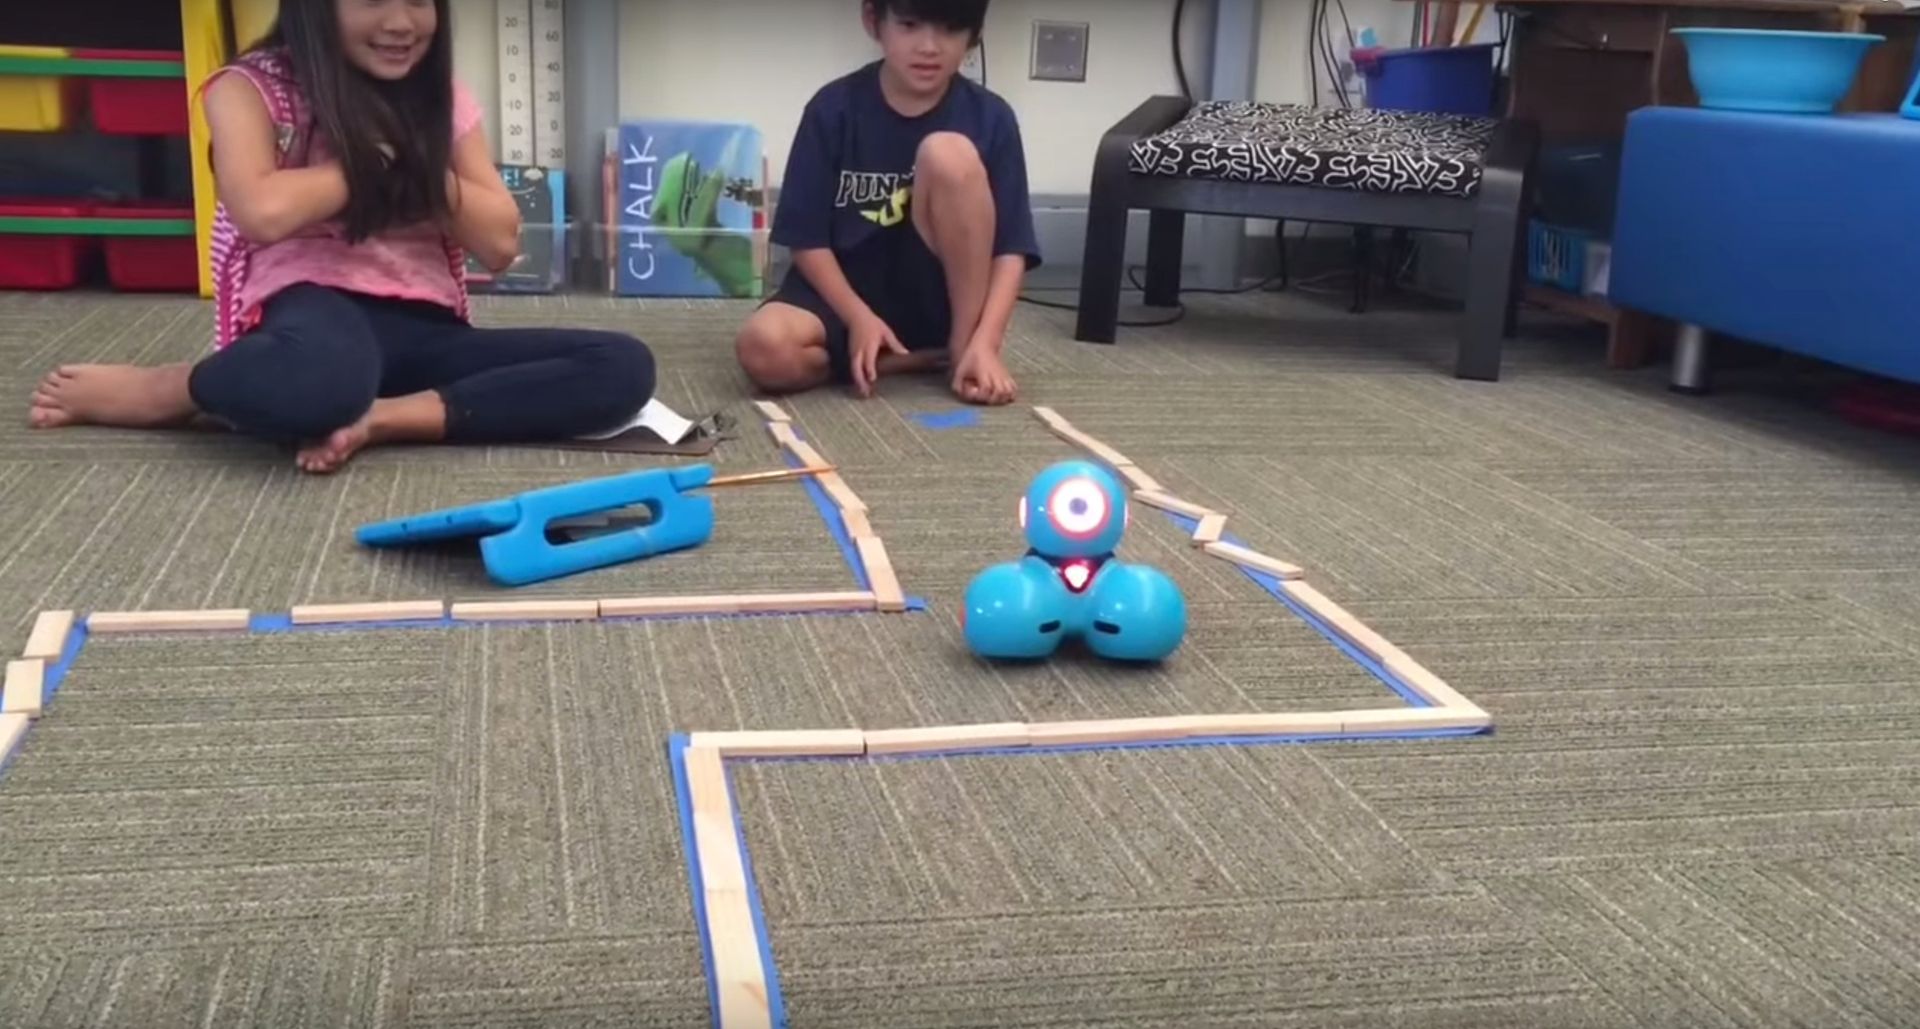 Coding projects with kids: Dot and Dash robots navigate a masking tape maze